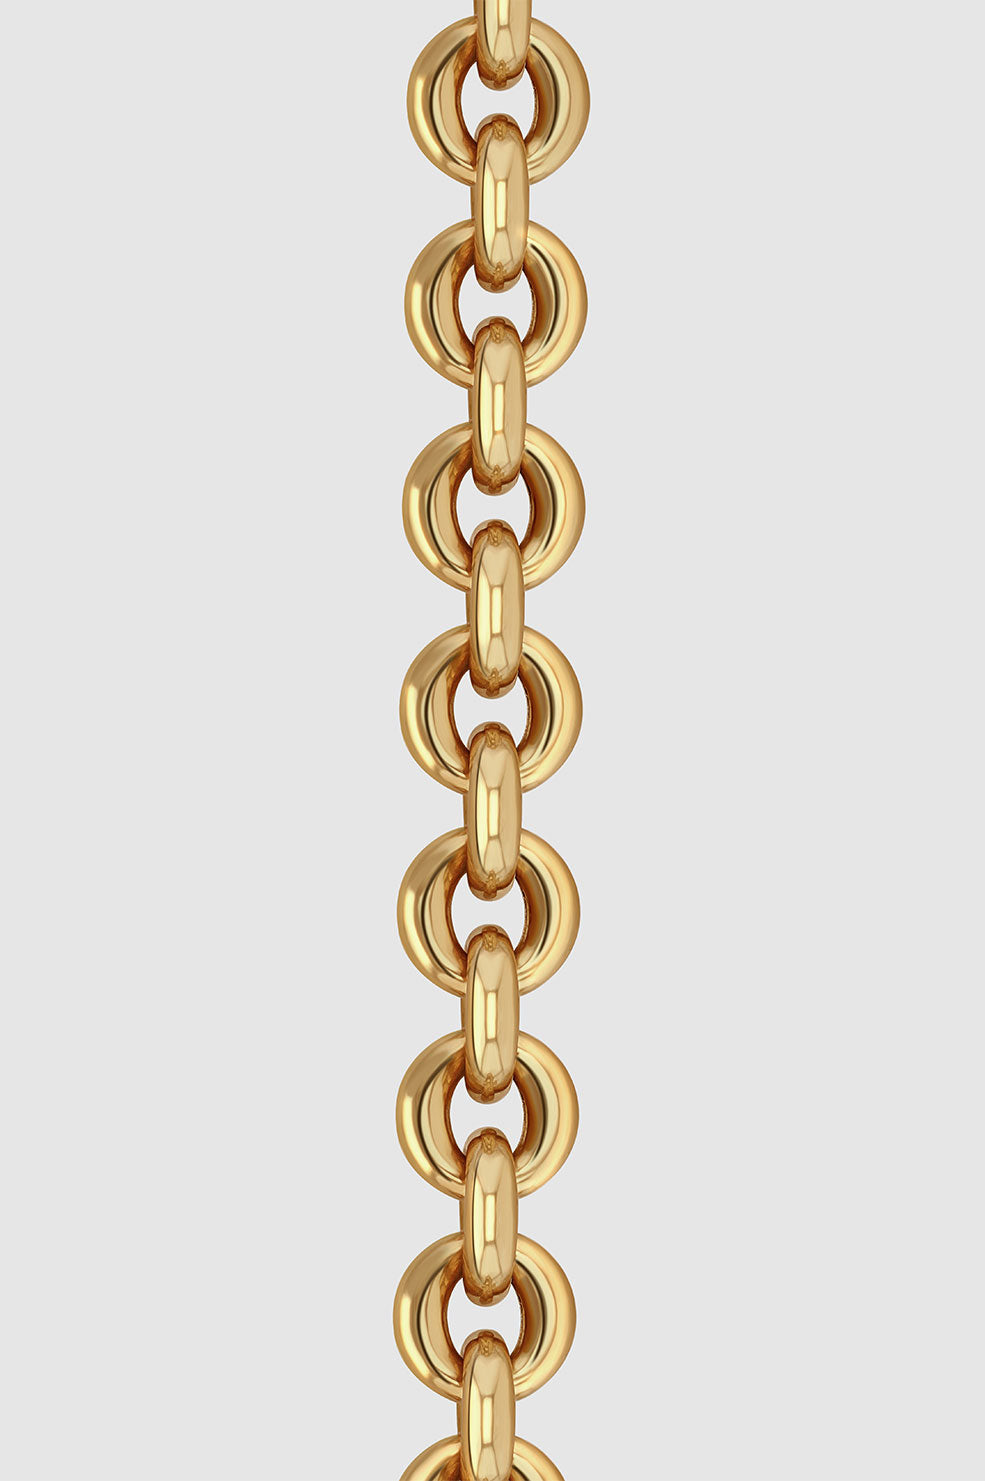 ANINE BING AB X MVB Rope Link Necklace - Gold